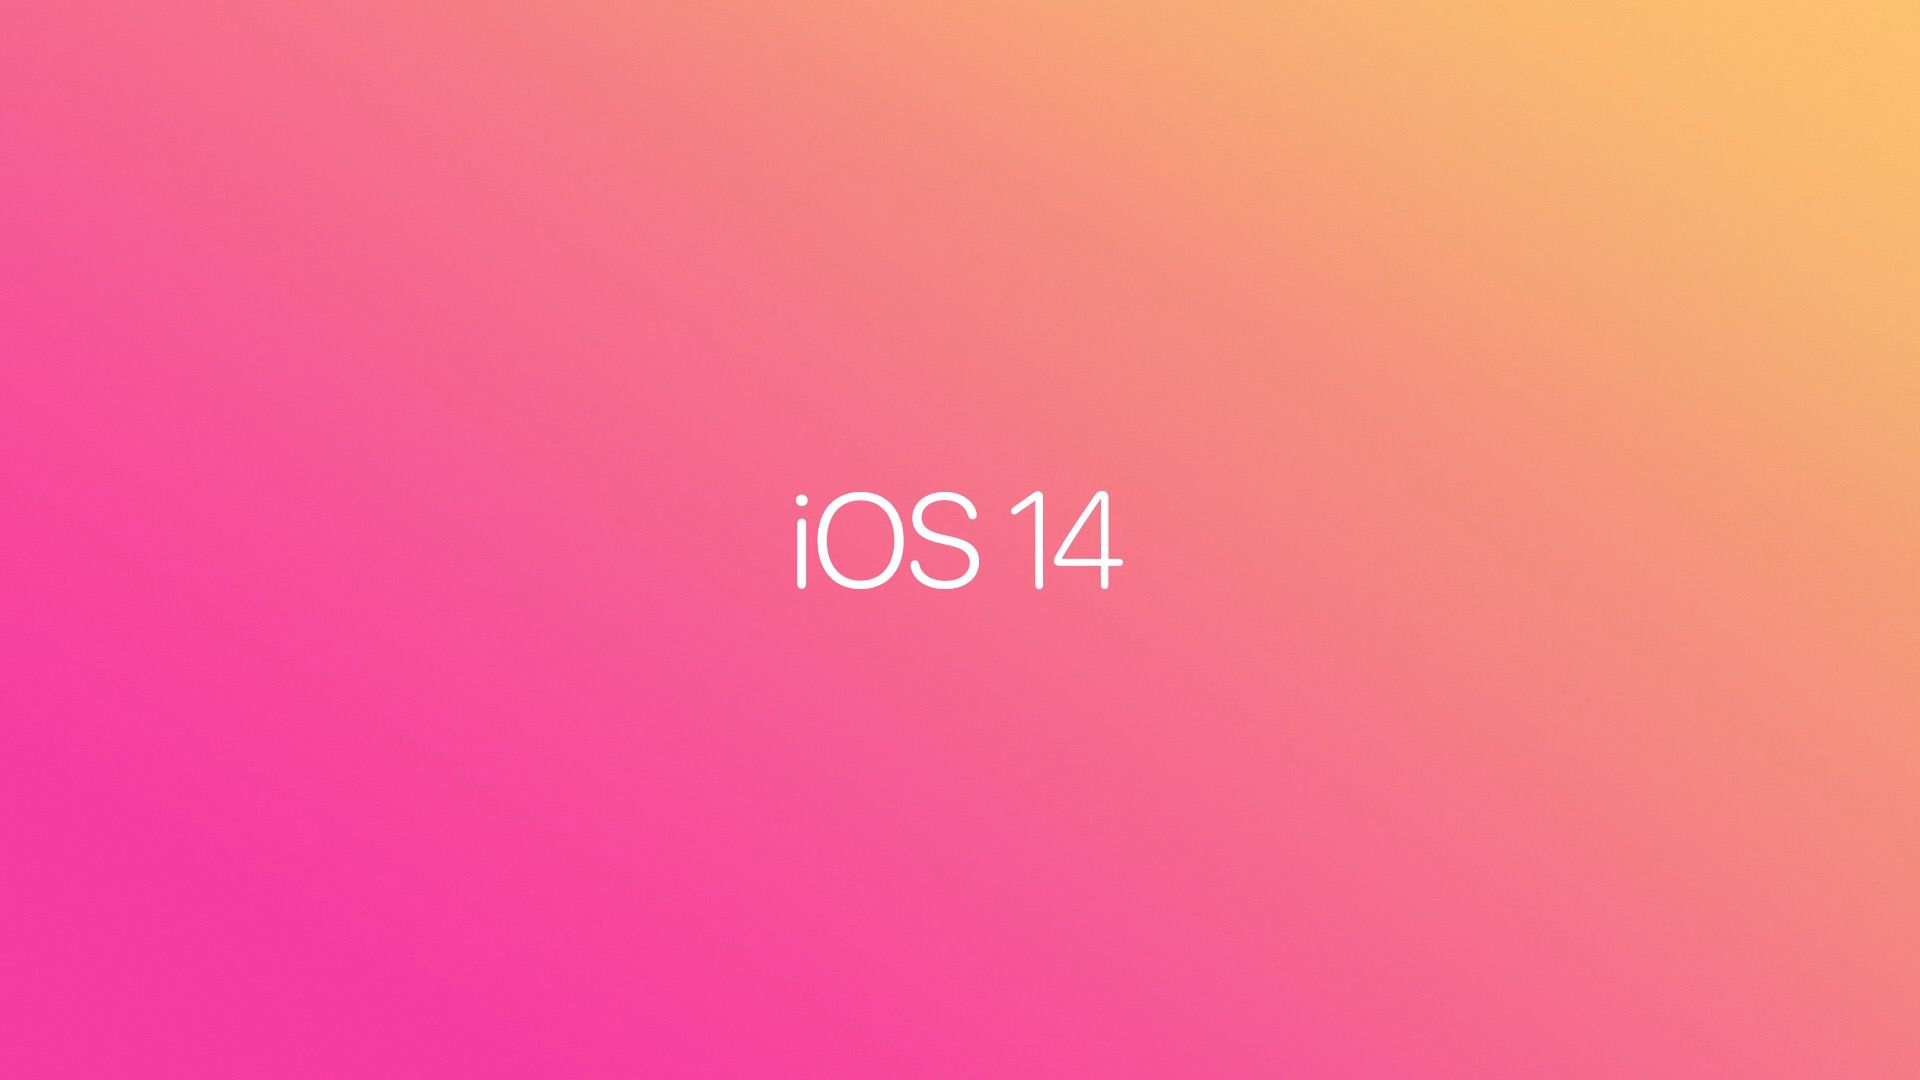 Download iOS 14 Wallpapers for iPhone